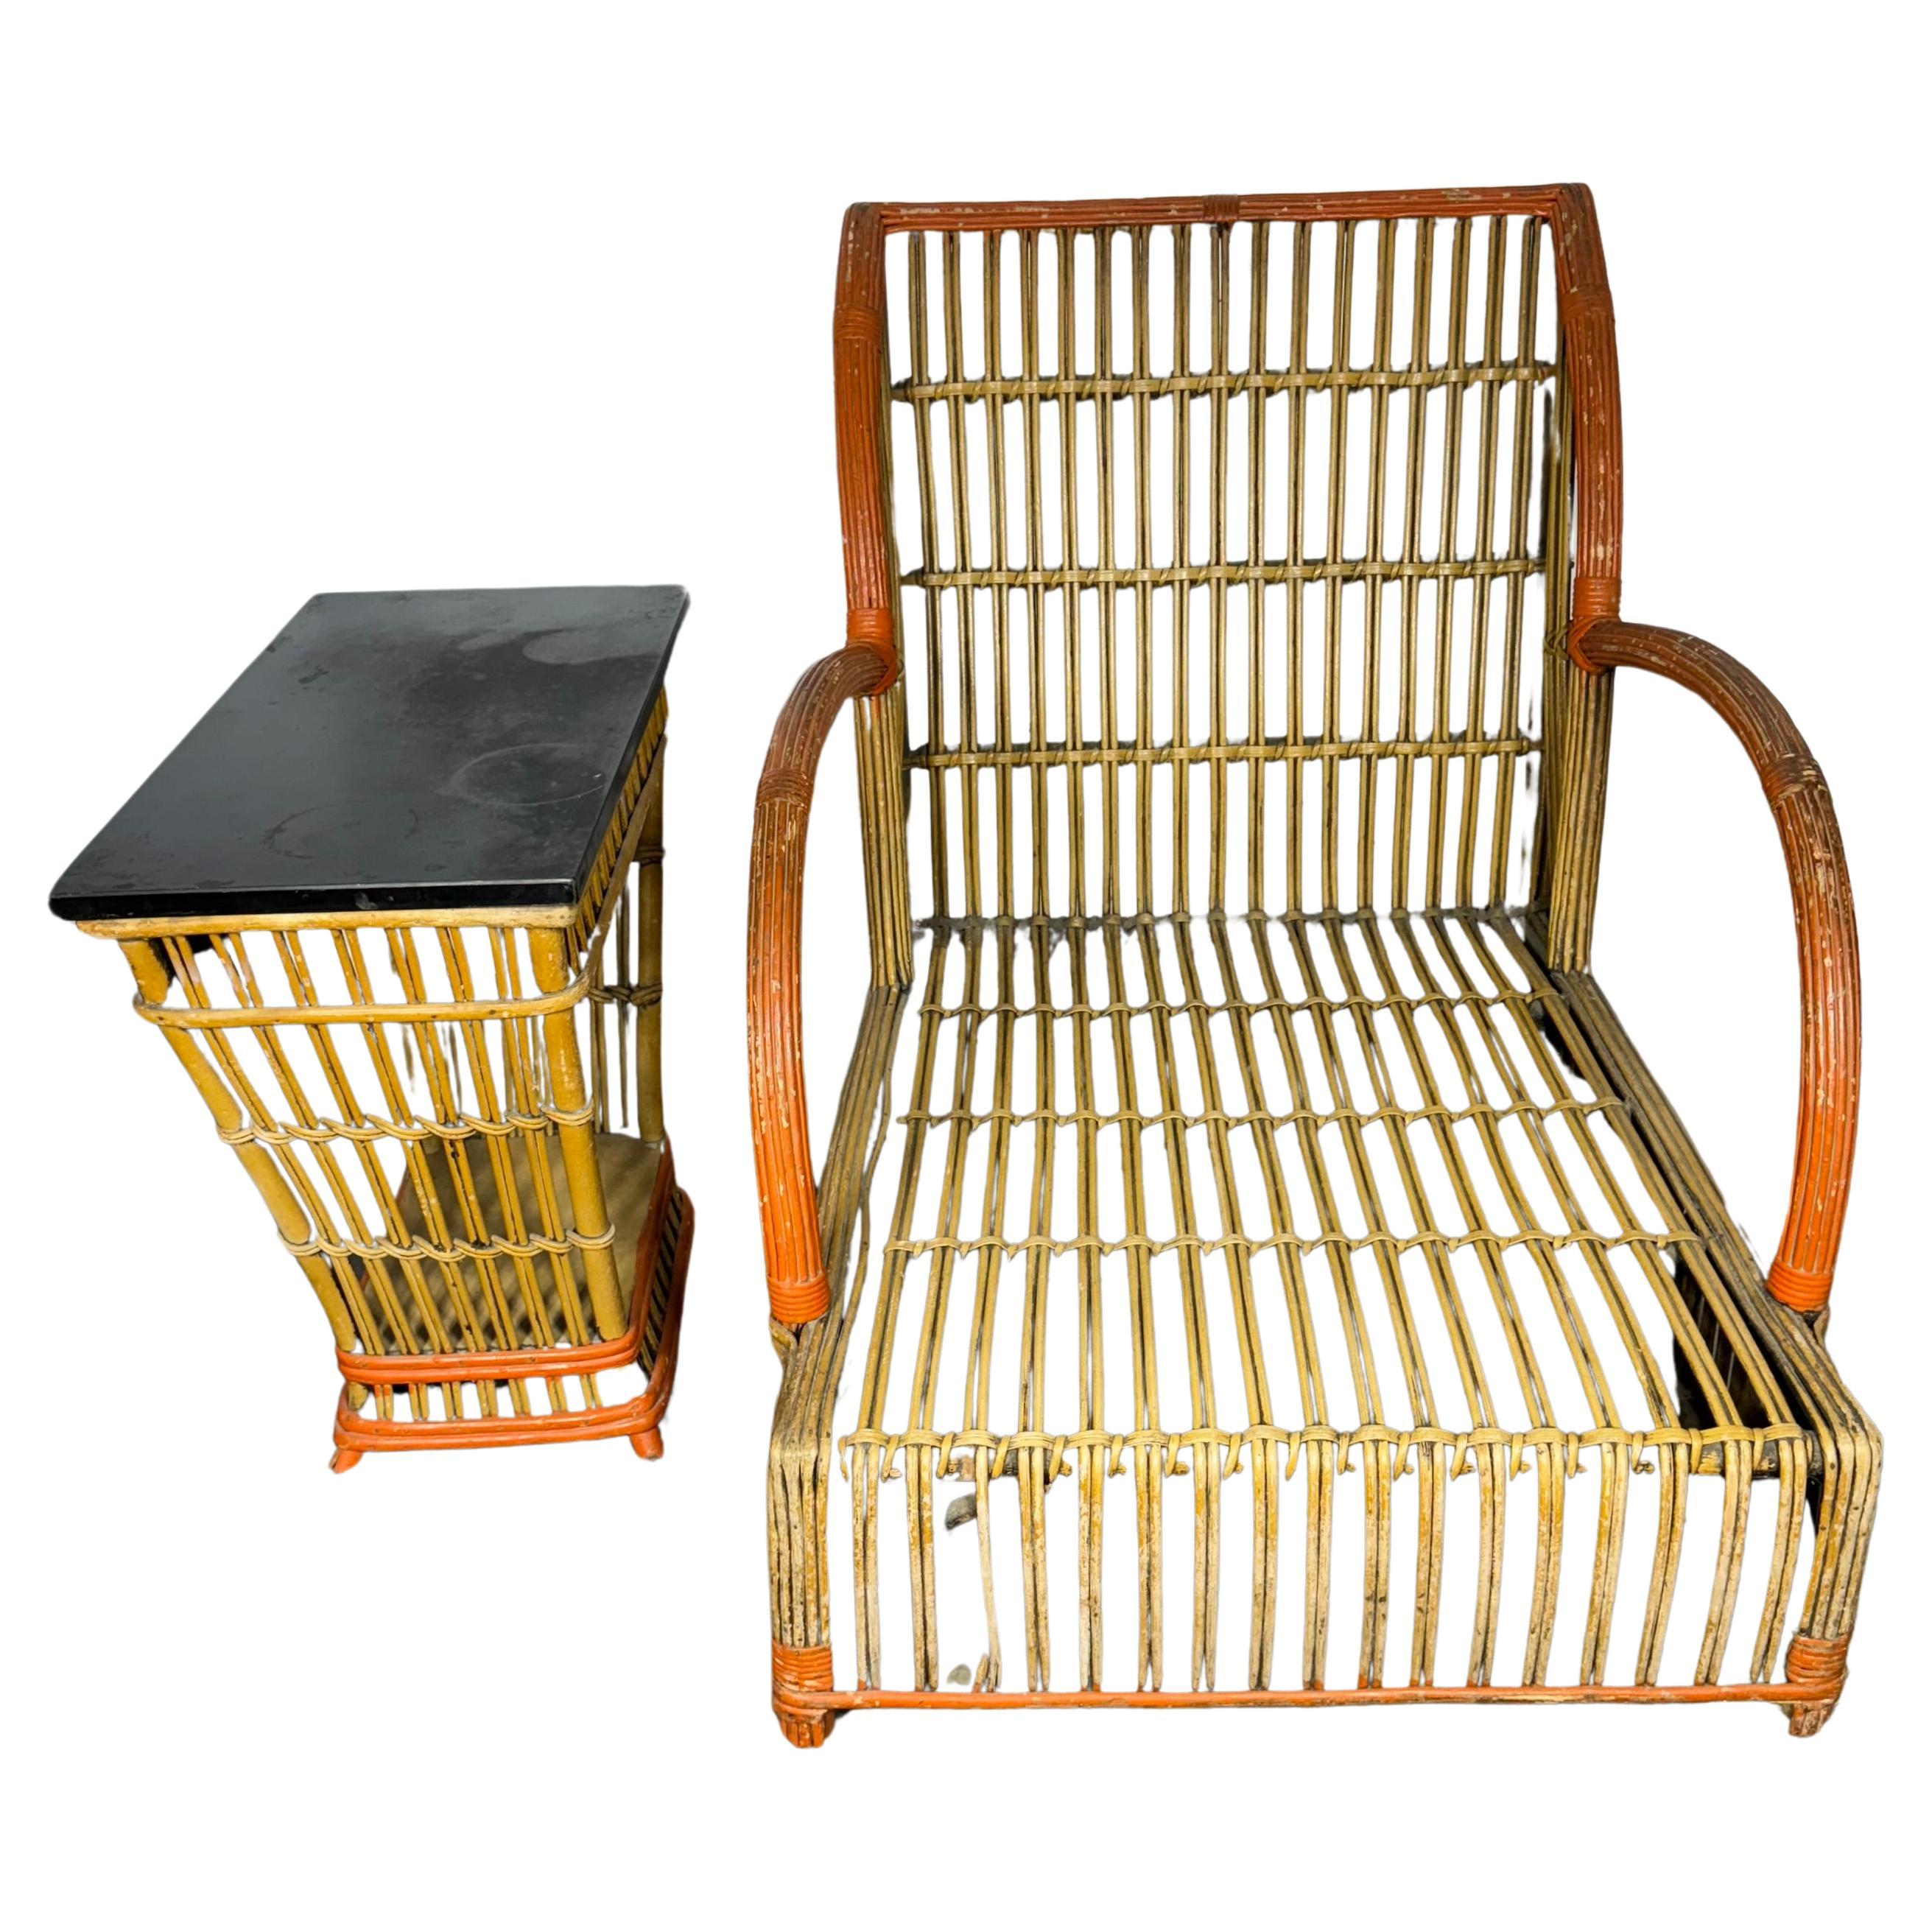 1930's Art Deco Split Reed / Stick Wicker Chair  and End Table. Ypslianti  For Sale